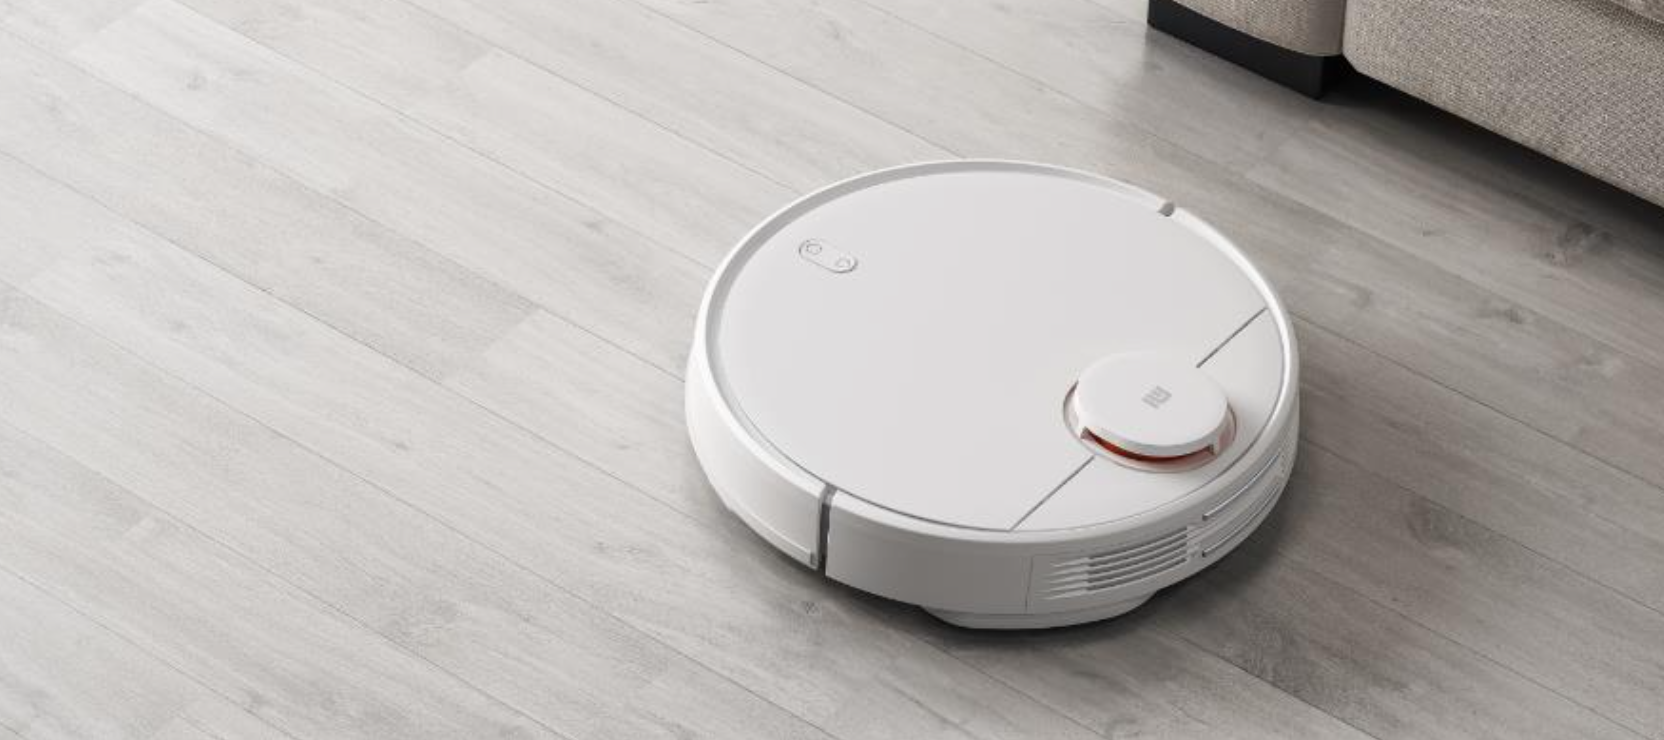 Pro 2 Mop and Xiaomi Robot Ultra 2S, introduced Mi Vacuum 2nd